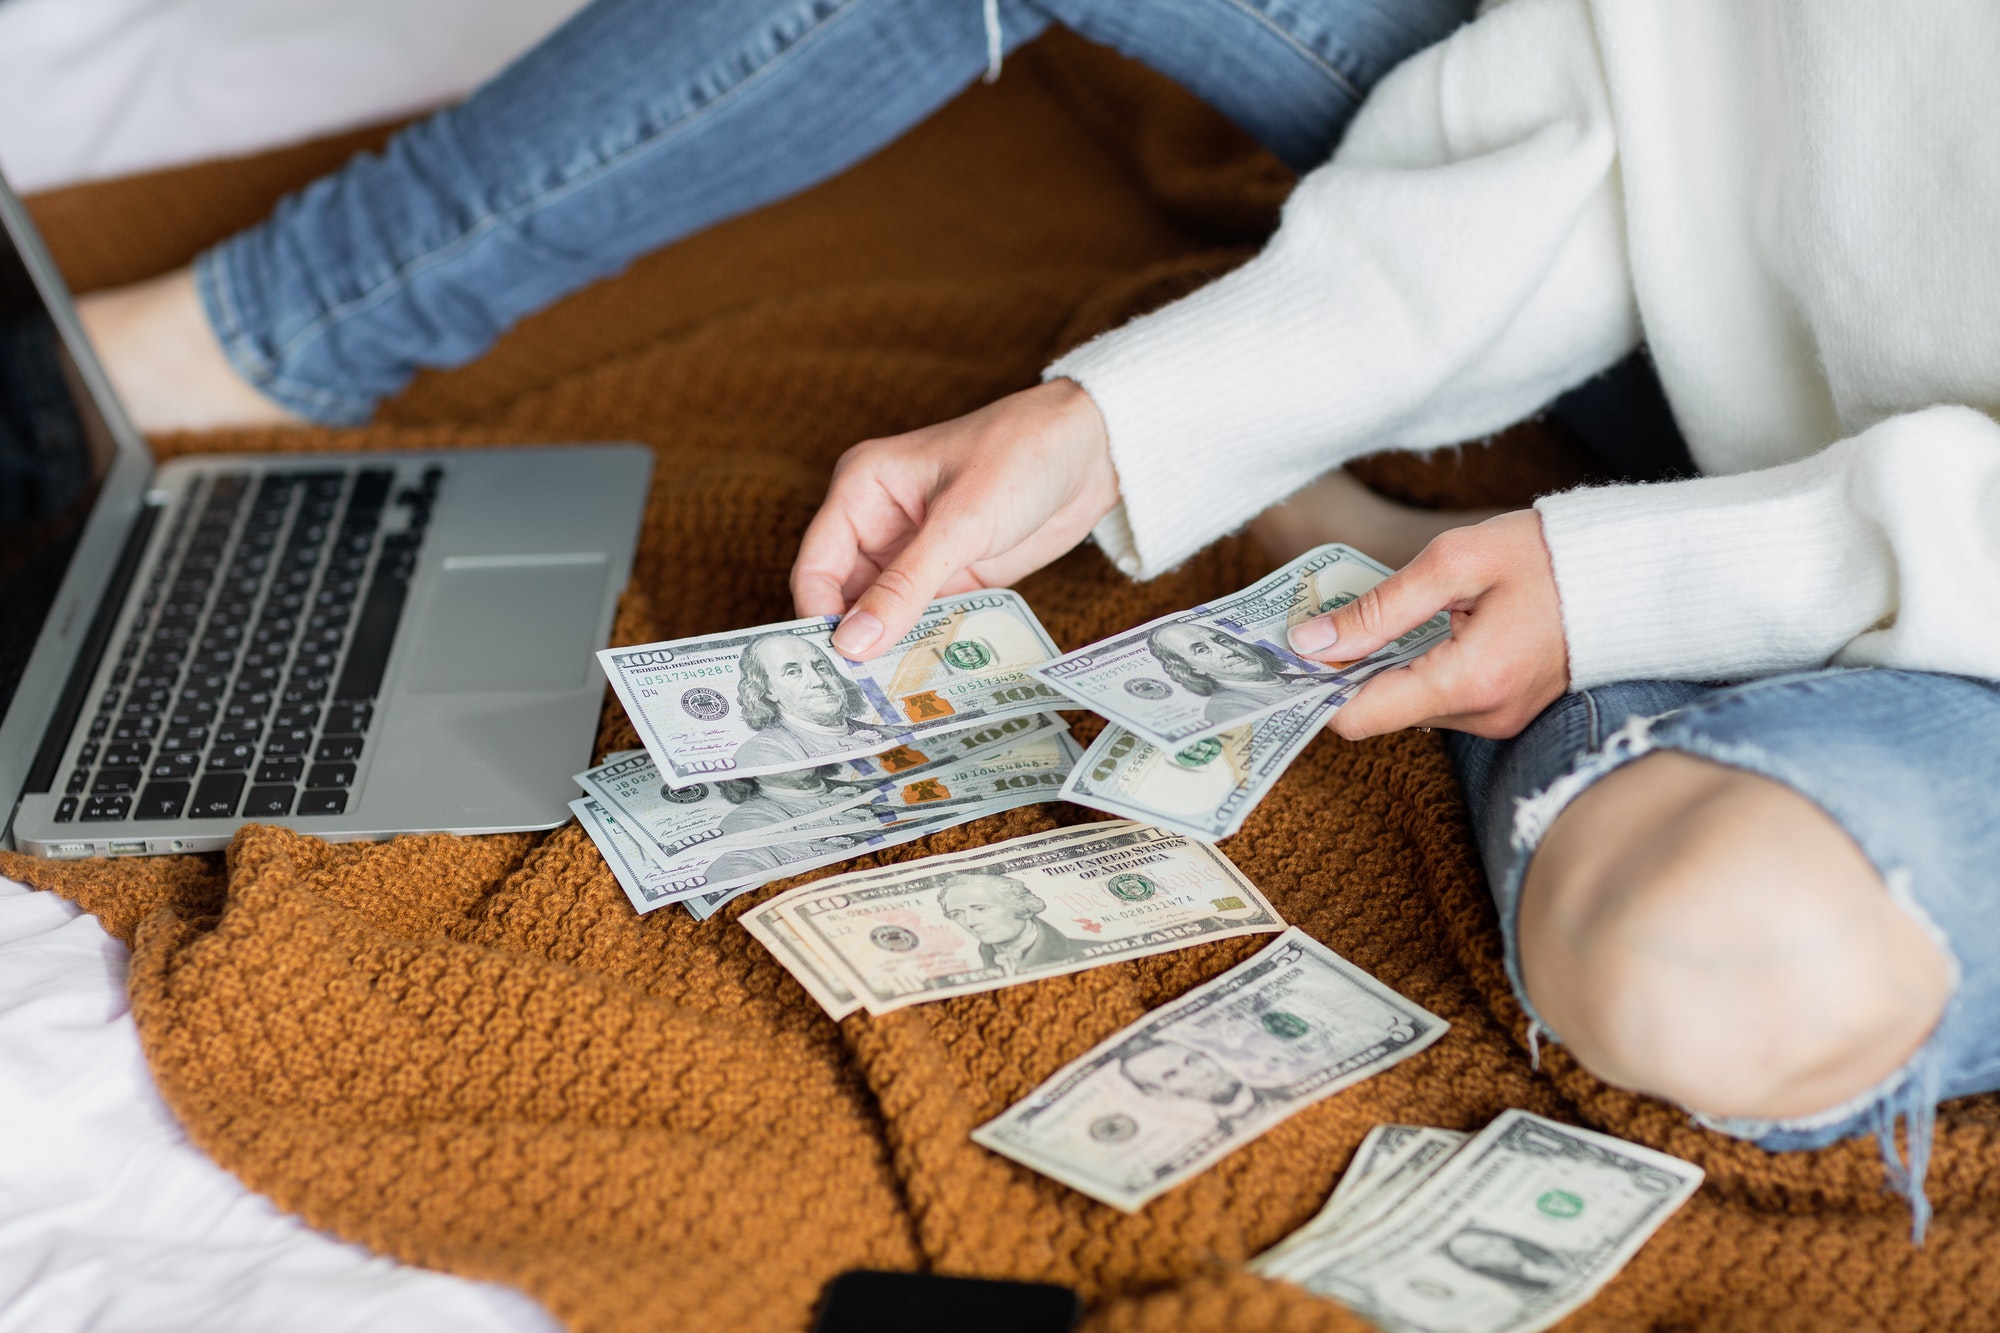 Woman counting cash money for Christmas gifts